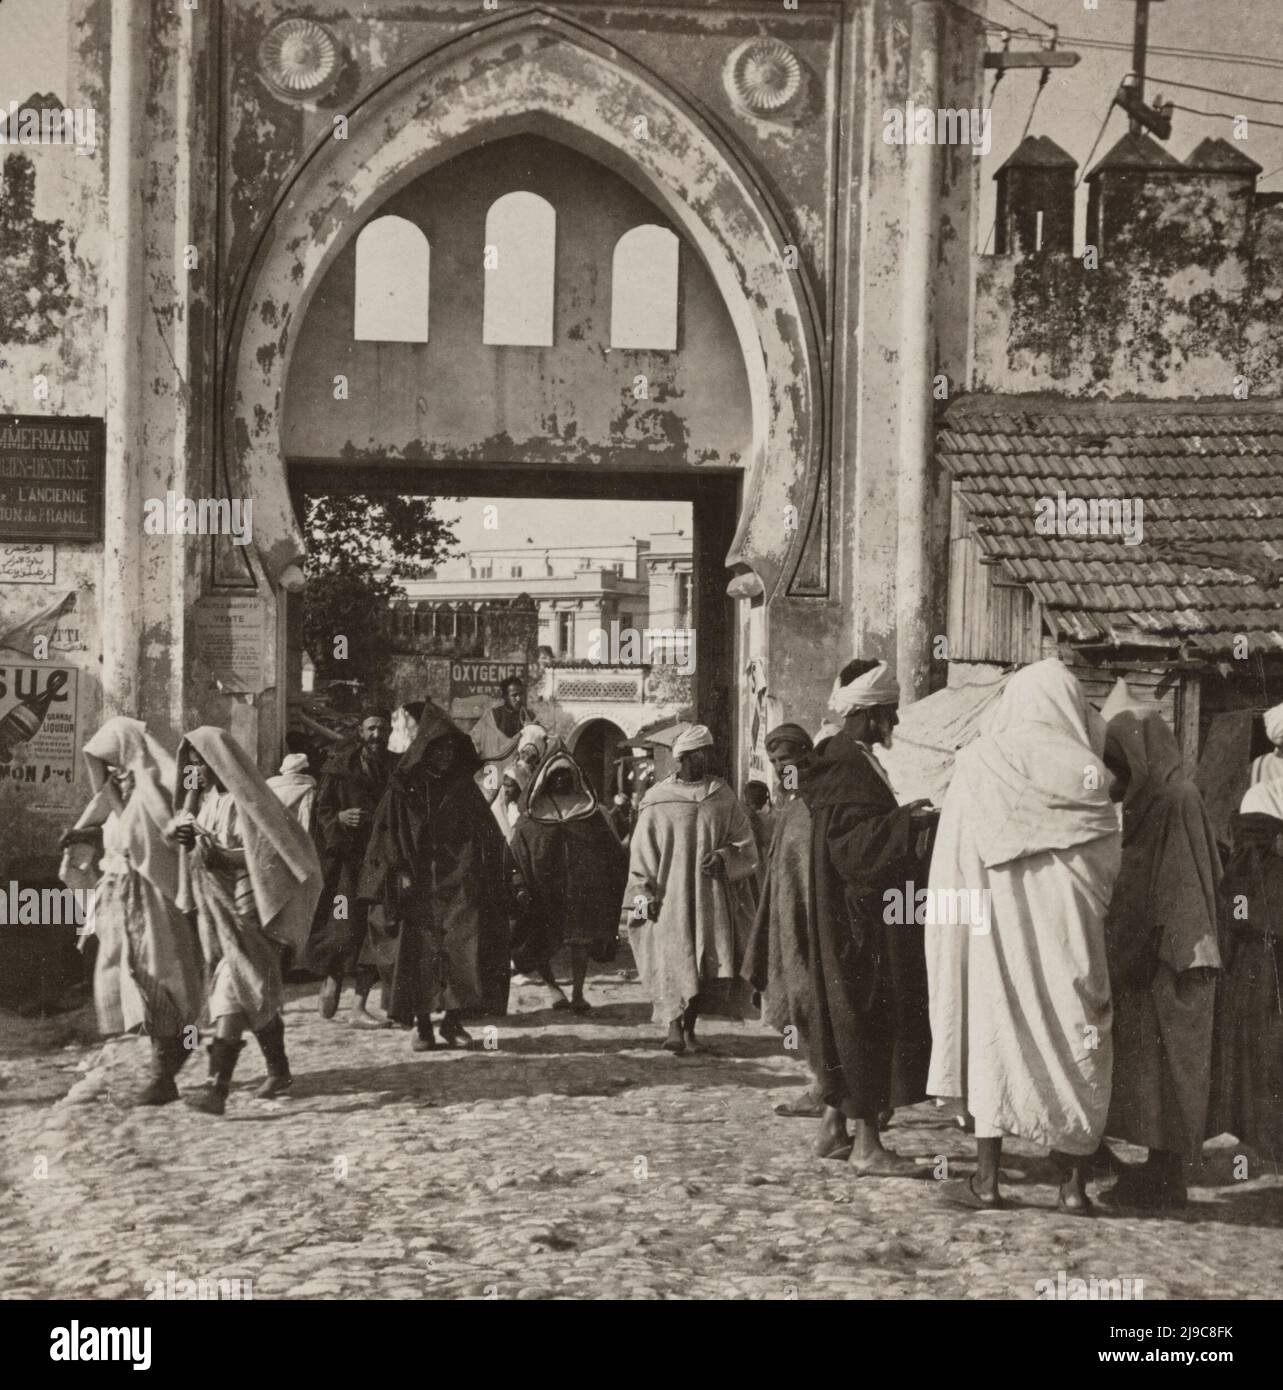 Bab-el-Faes, or Outer Town Gate between the Main Street and Outer Market, Tangier, Morocco, 1903 Stock Photo